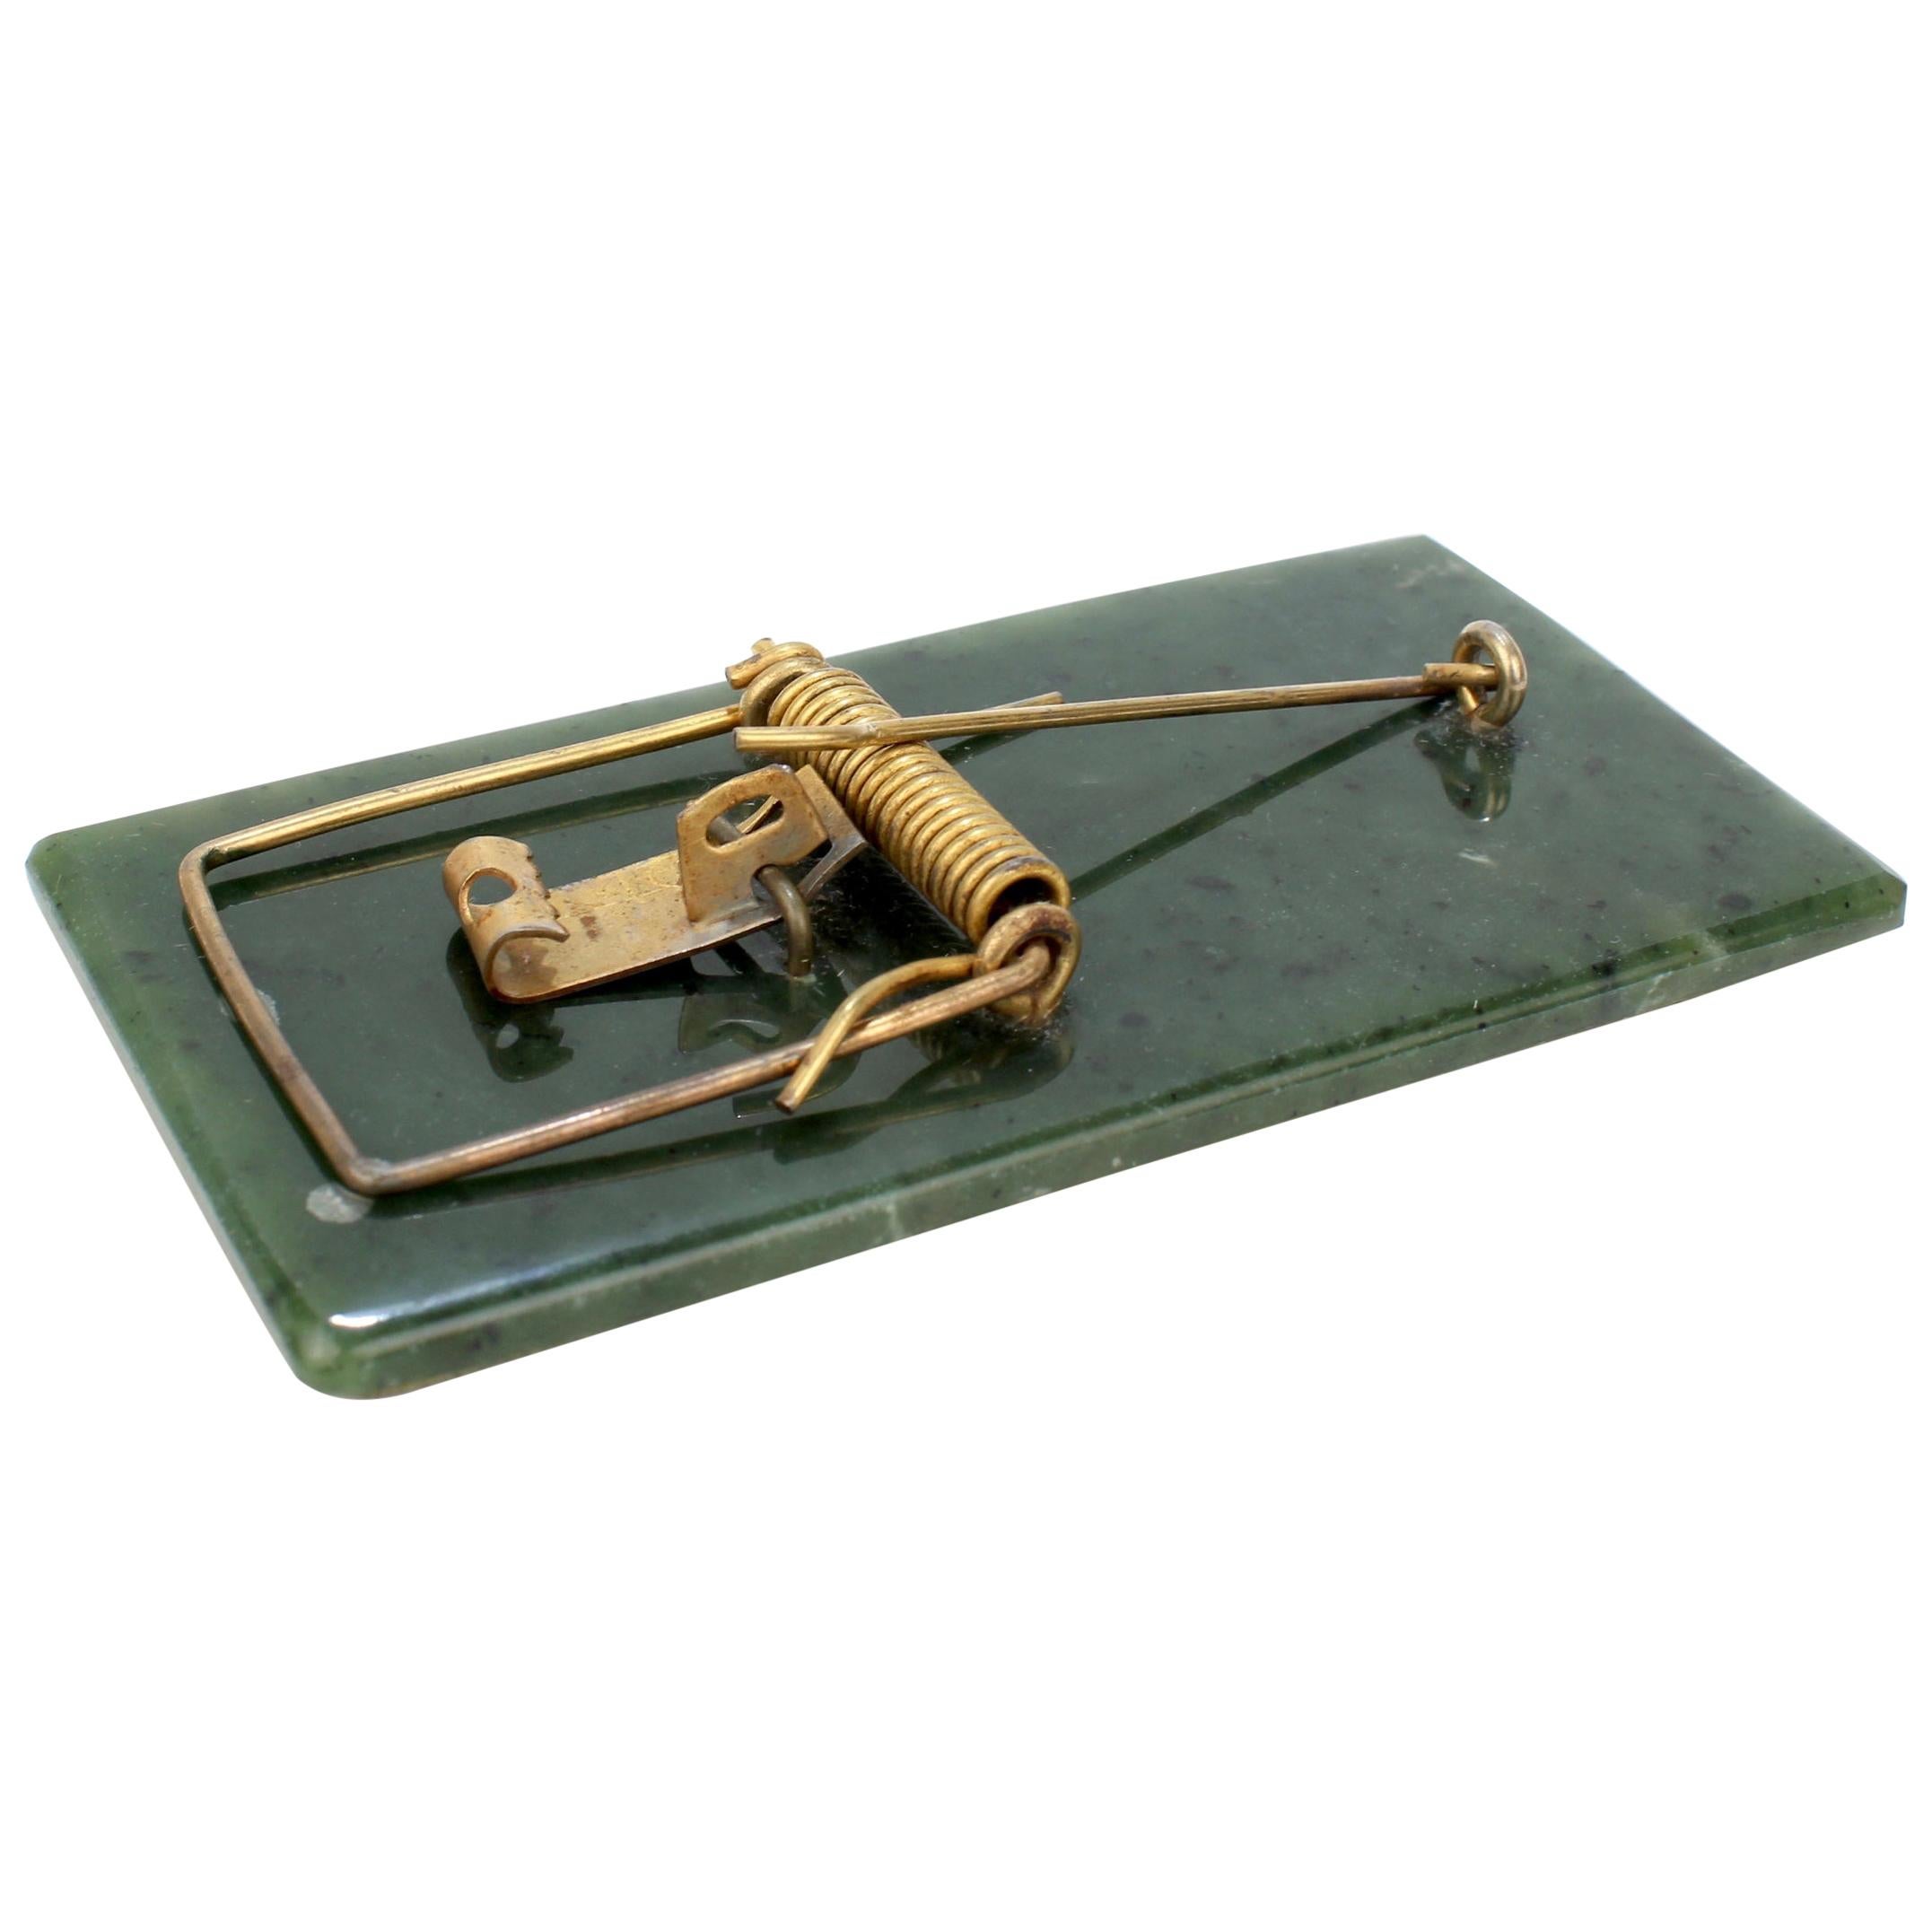 Whimsical Jade Gemstone and Gold-Plated Mouse Trap Sculpture or Desk Paper Clip